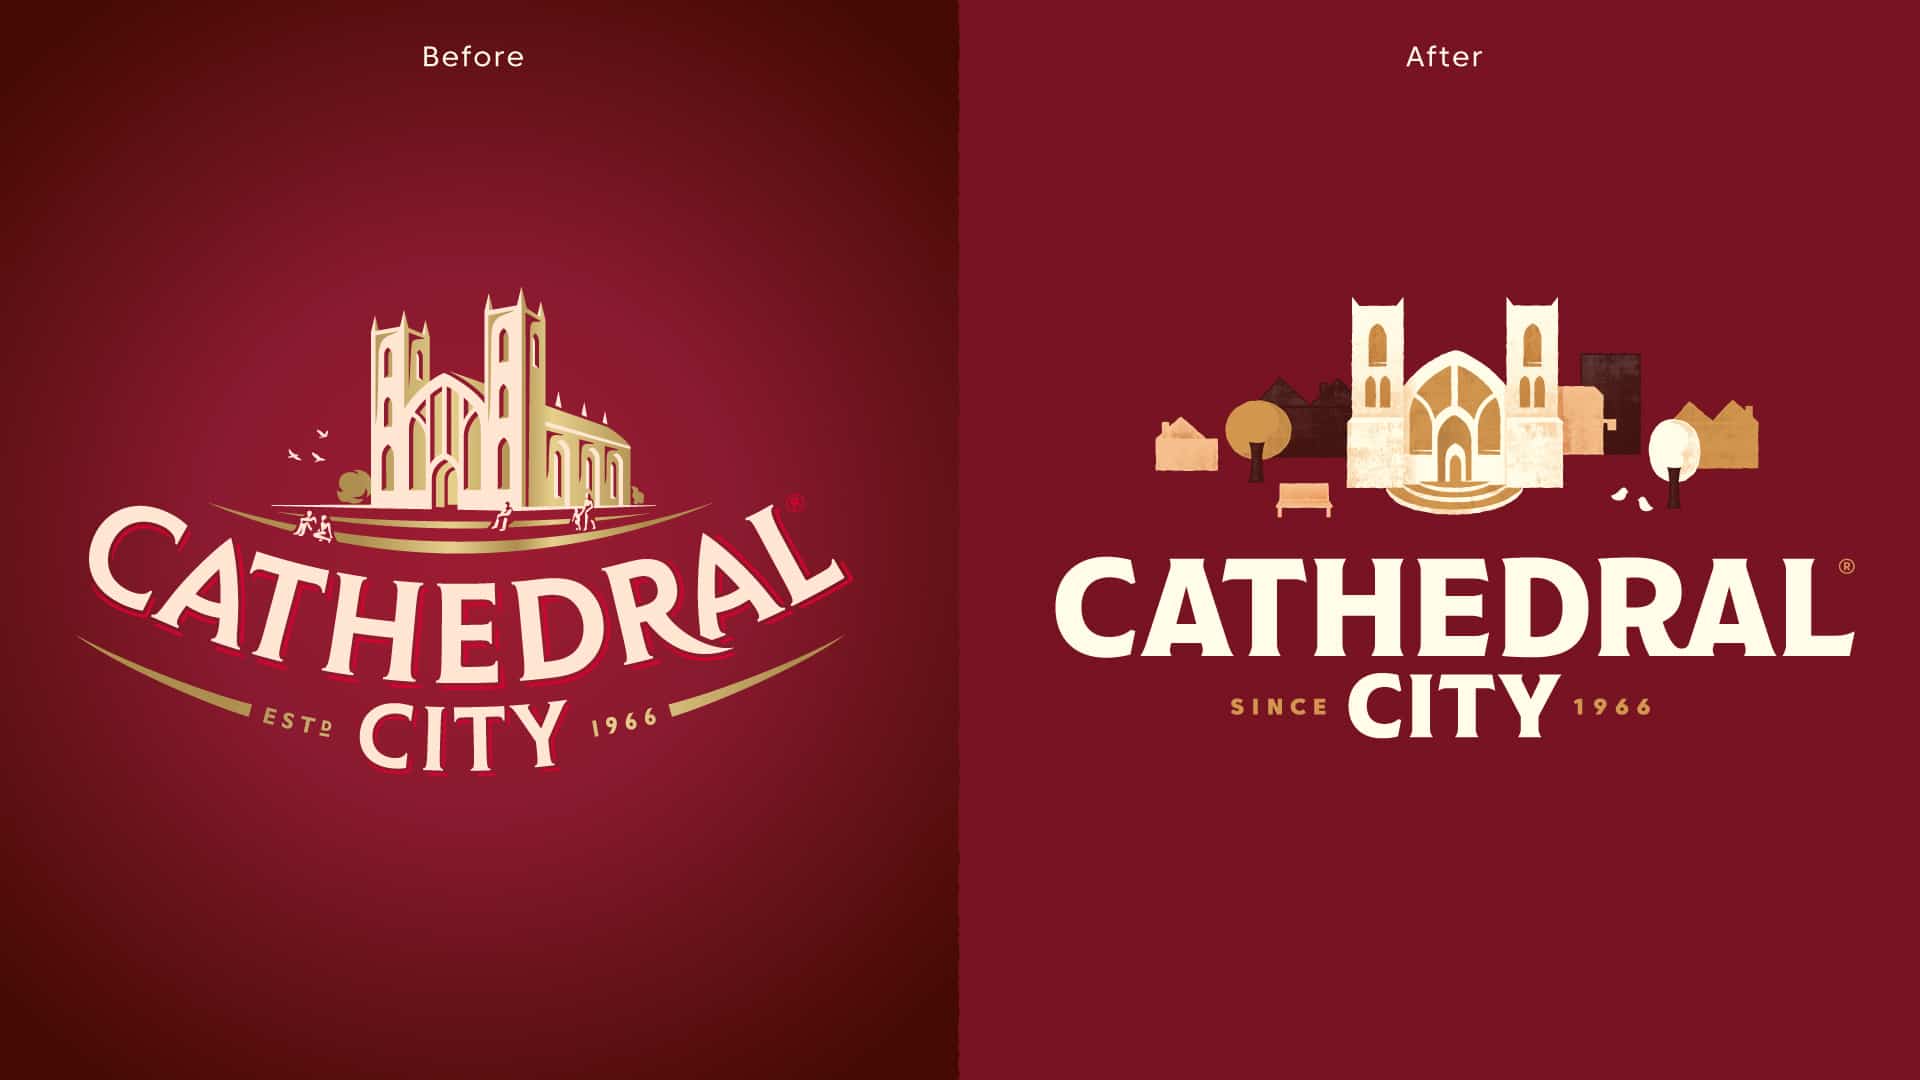 Cathedral City Cheddar Cheese Teams Up with BrandOpus To Give It's Brand Identity A New Direction